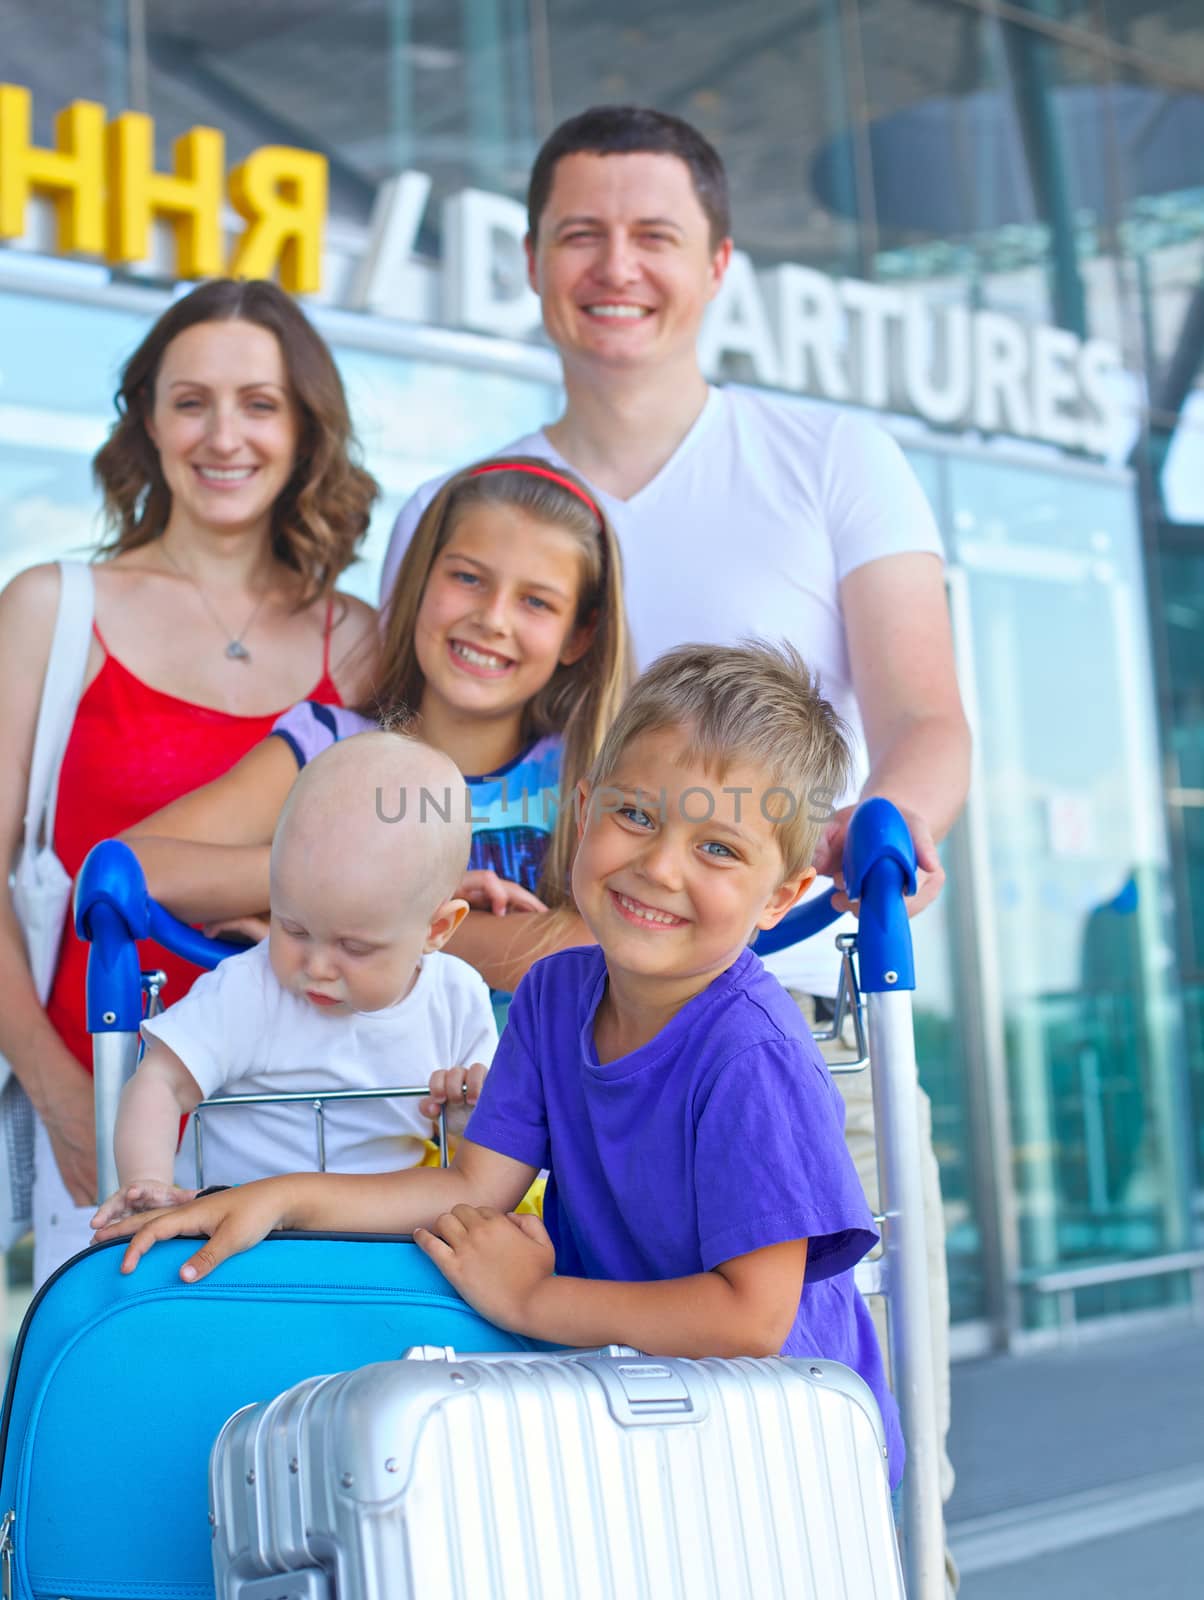 Portrait of traveling family of five with suitcases in airport